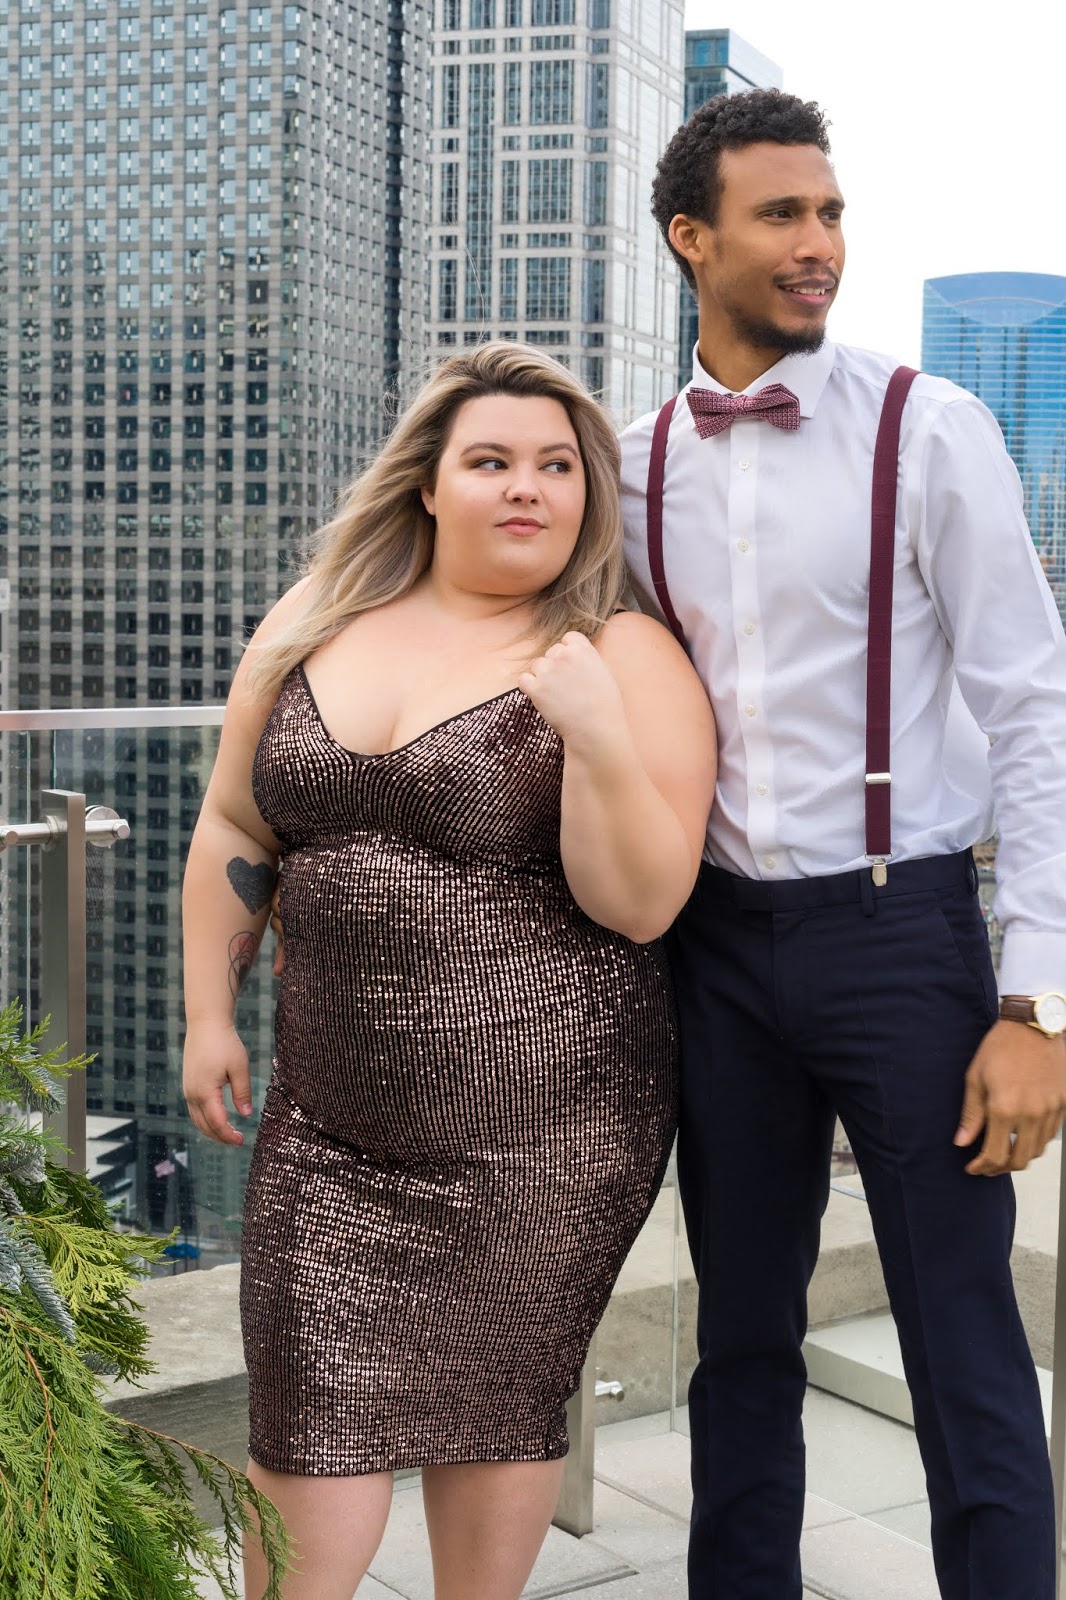 Chicago Plus Size Petite Fashion Blogger and model Natalie Craig, of Natalie in the City, discusses being in a mixed weight relationship, finding love in Instagram DMs, losing weight for love, and dating long distance.